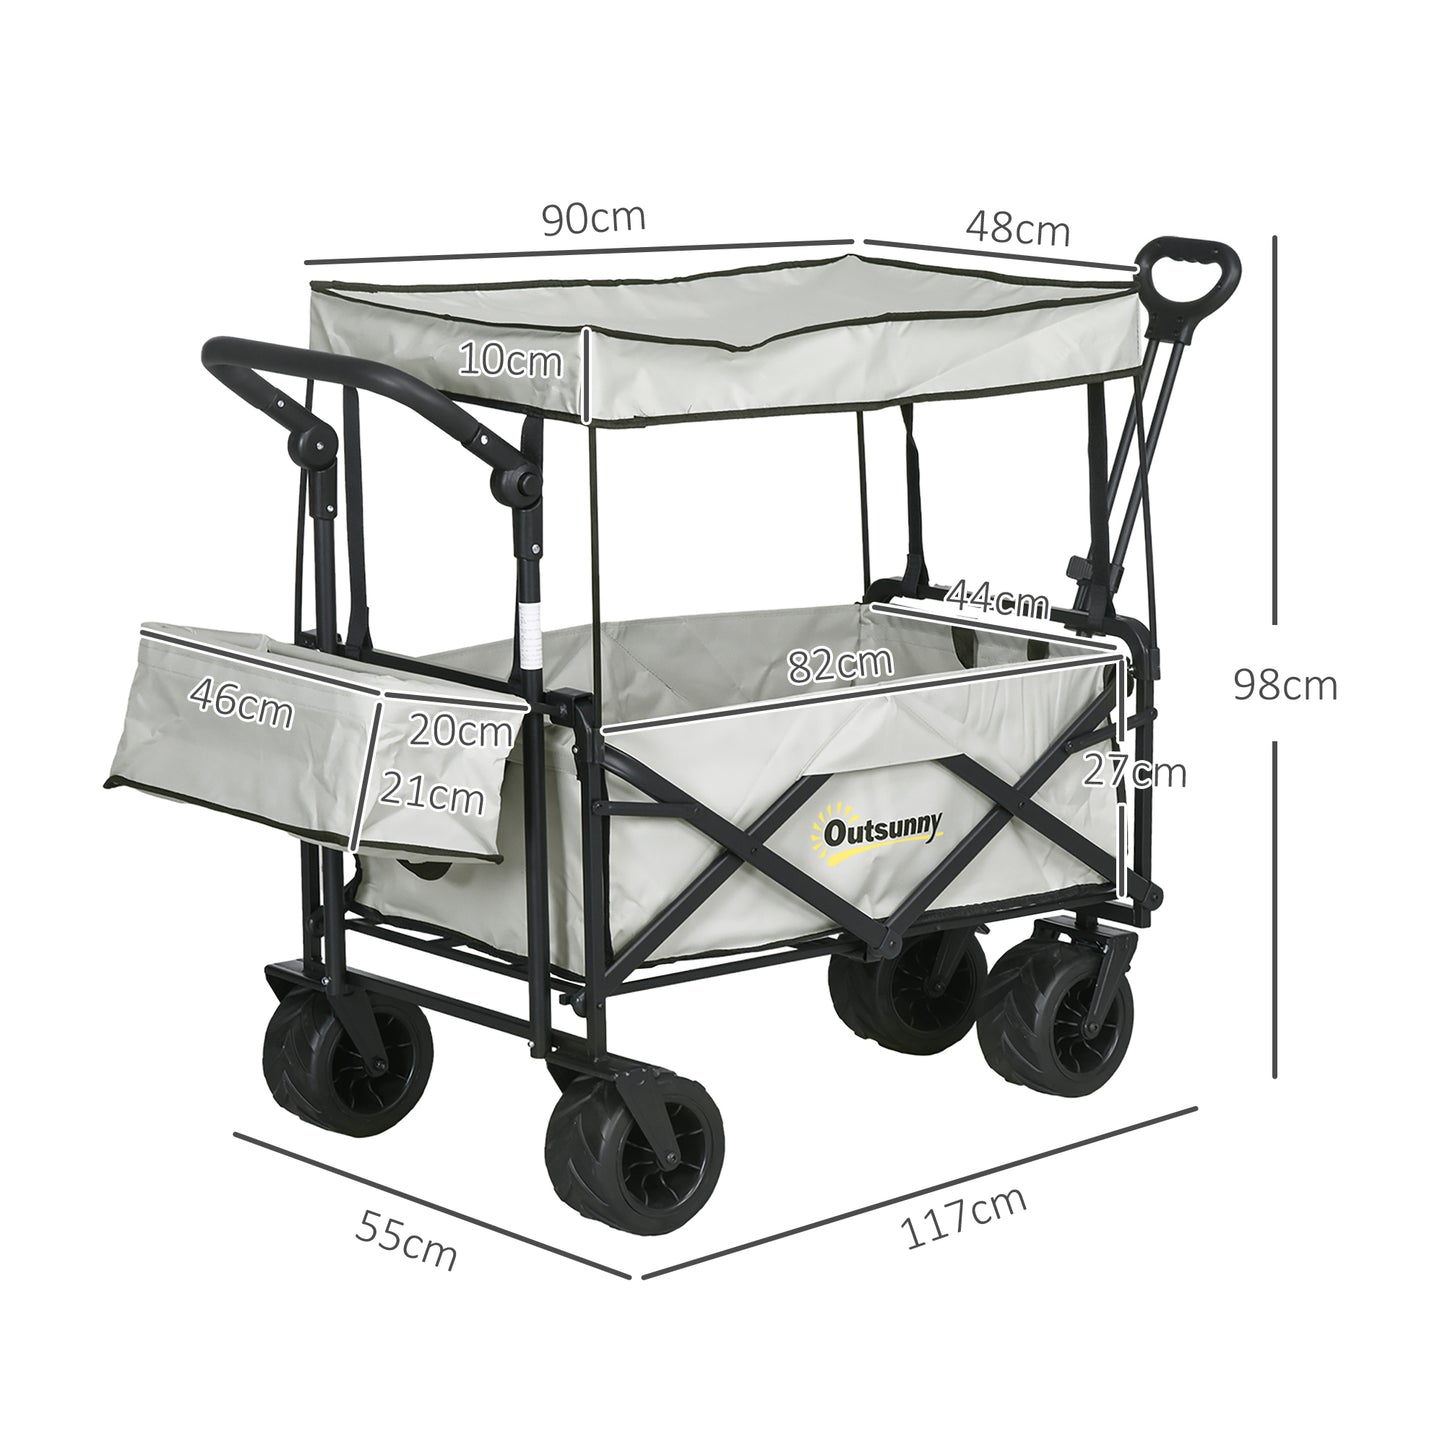 Outsunny Folding Trolley Cart Storage Wagon Beach Trailer 4 Wheels with Handle Overhead Canopy Cart Push Pull for Camping, Grey